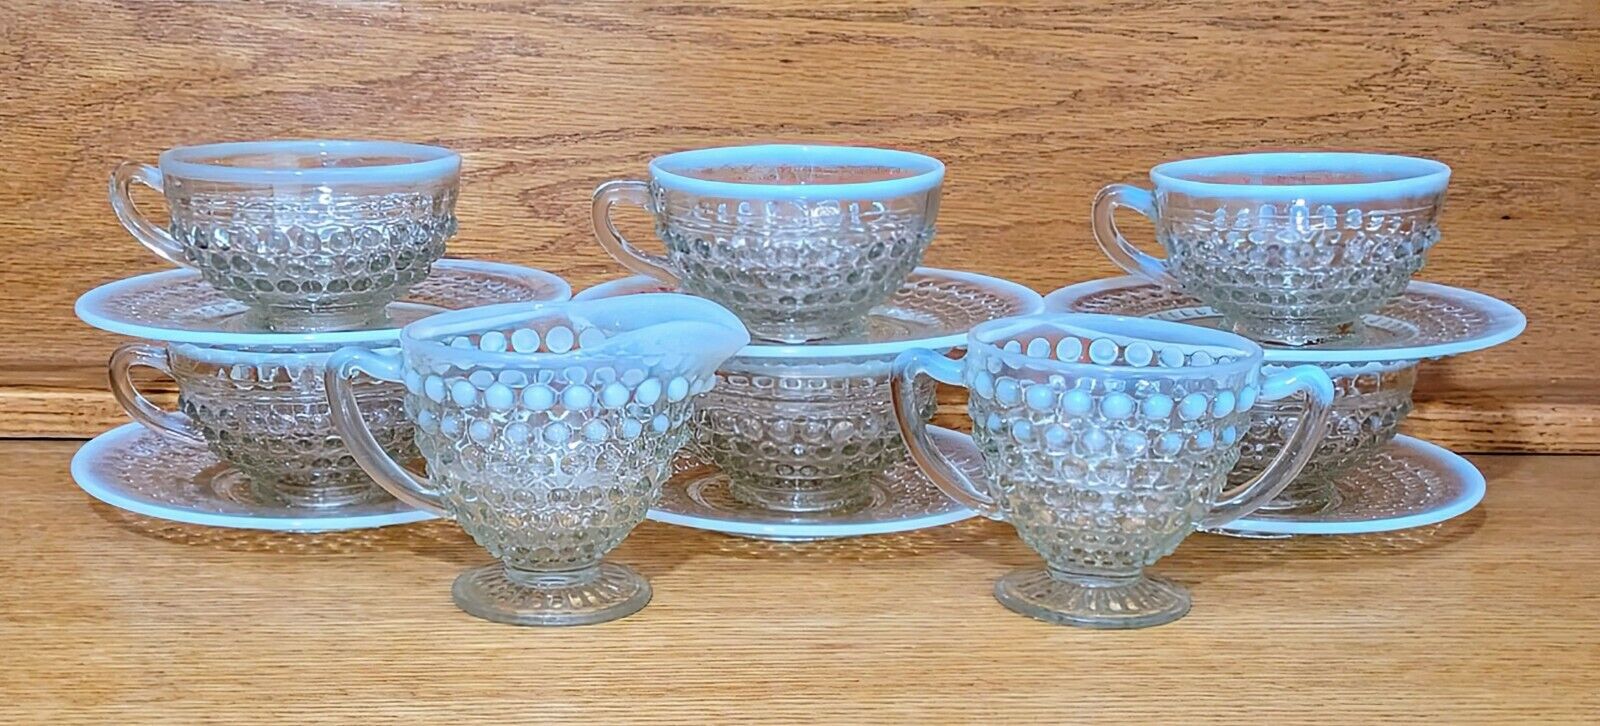 14 Piece Vintage Anchor Hocking Clear Opalescent Moonstone Hobnail Dishes 